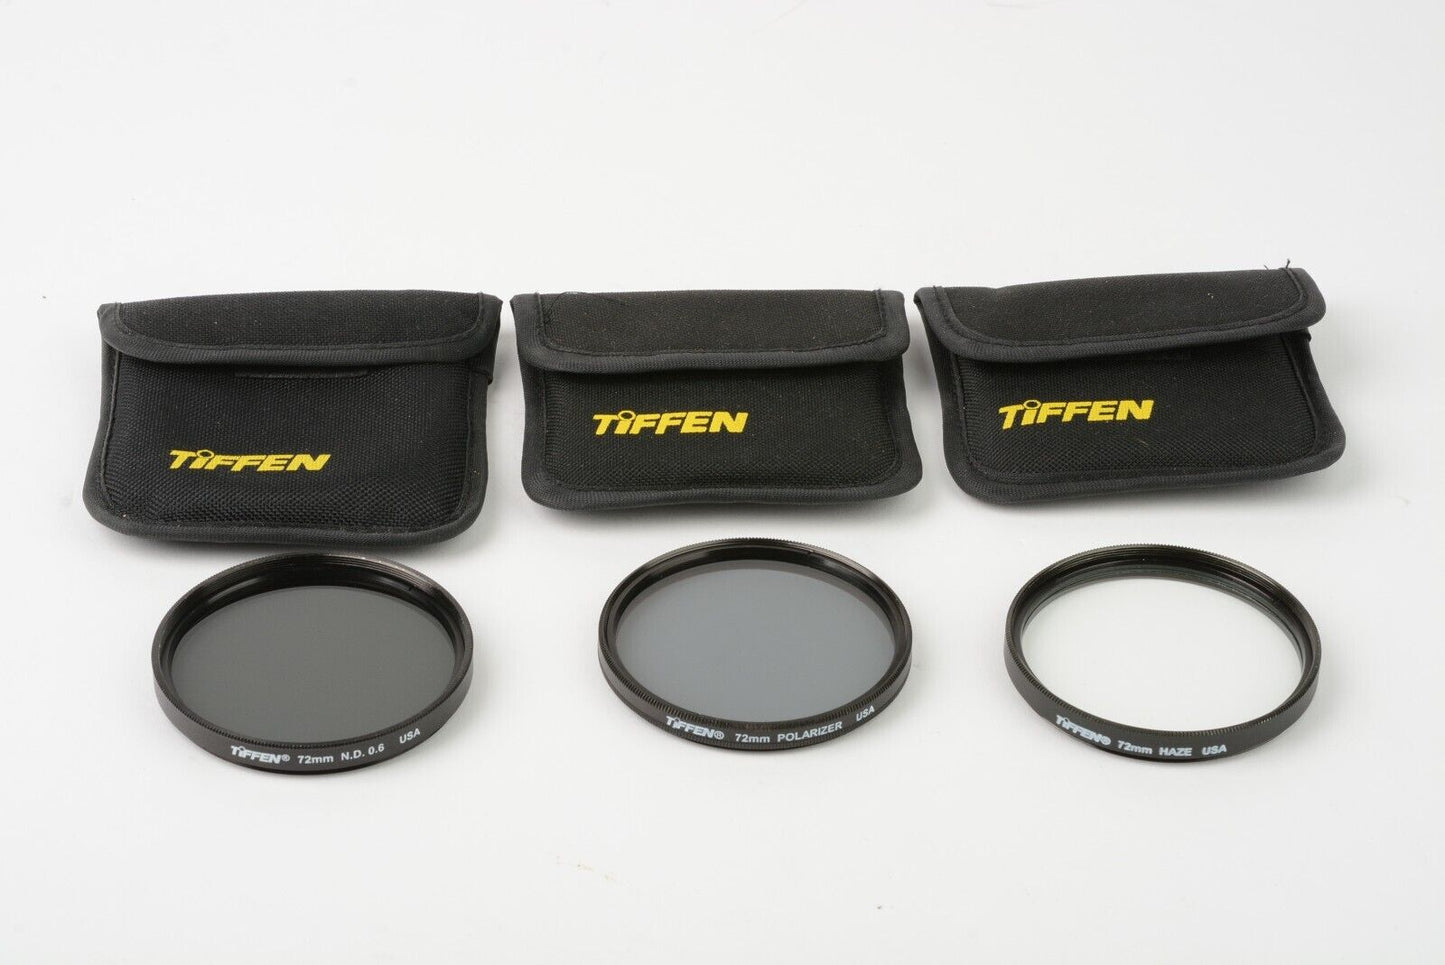 EXC++  3X TIFFEN 72mm FILTERS IN POUCHES:  UV, POLA, ND6, NICE & CLEAN